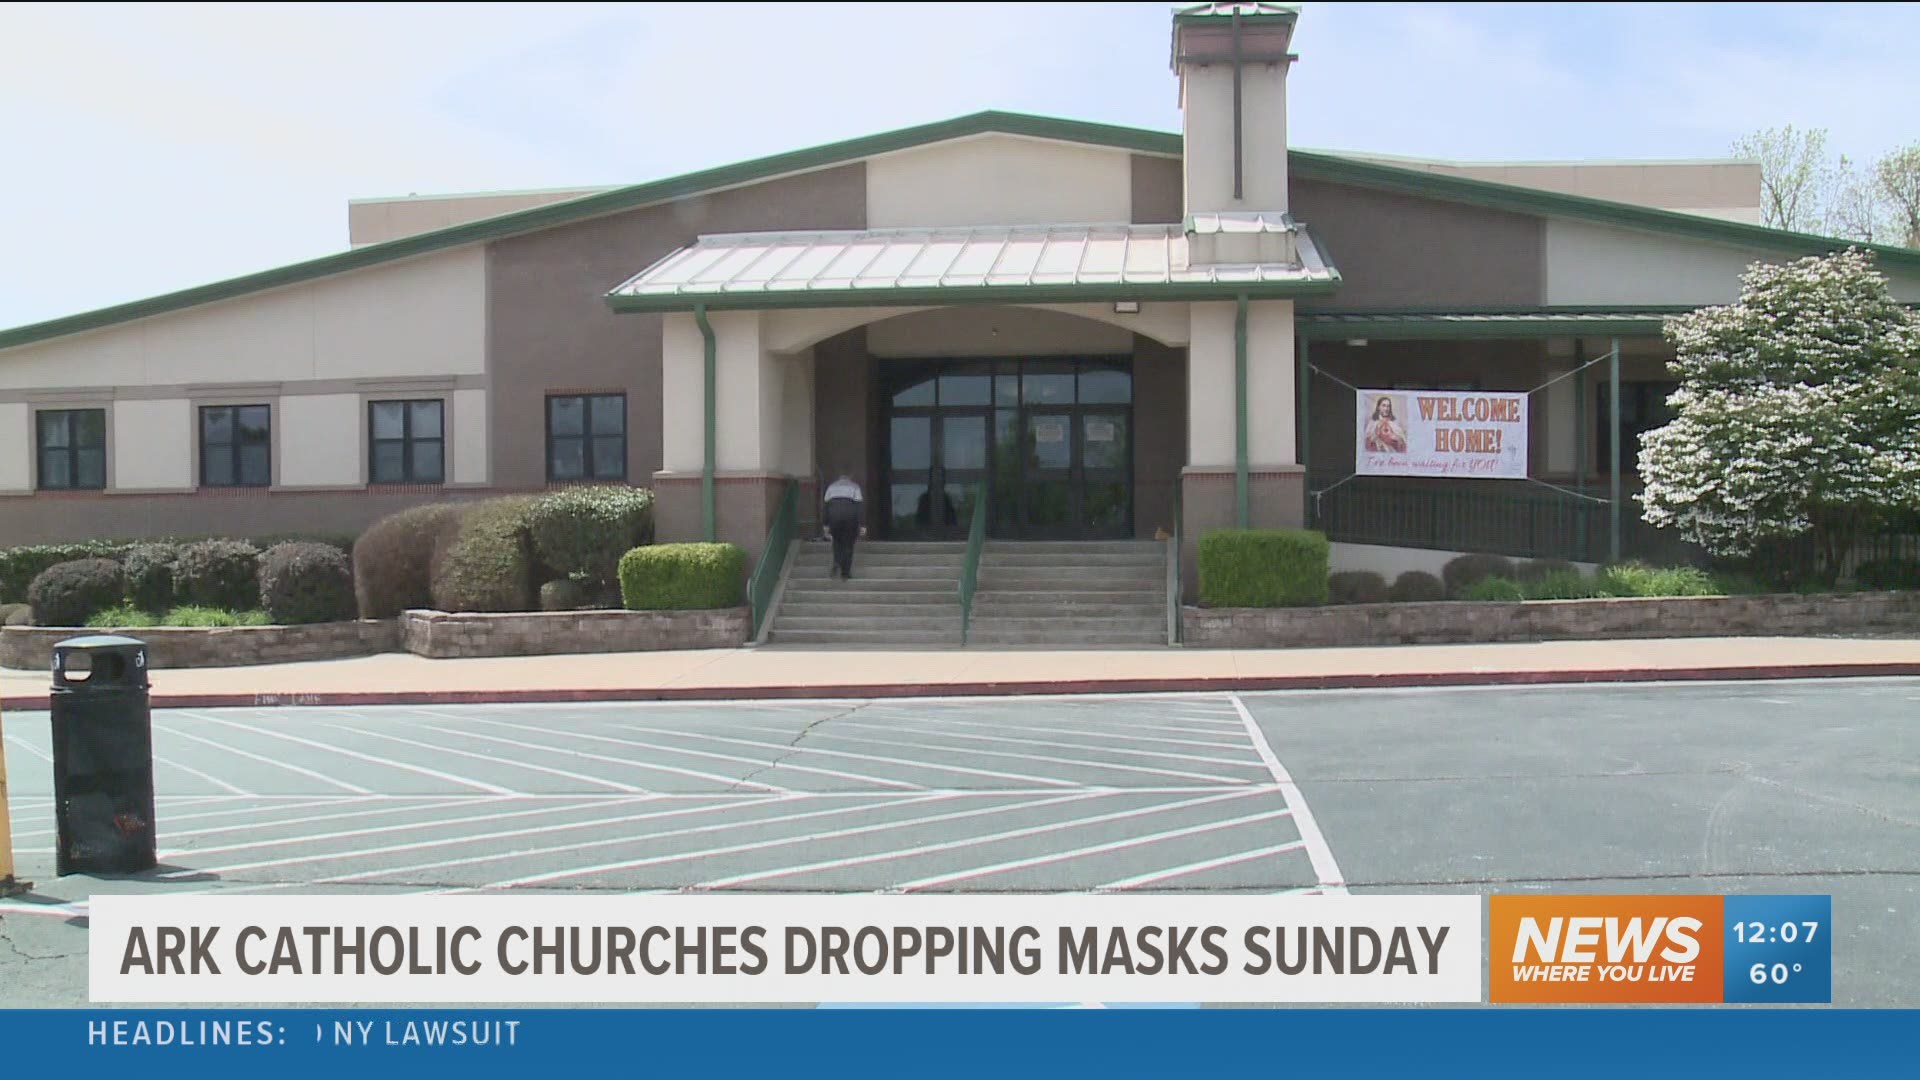 Starting this weekend, congregations may gather in Arkansas to attend mass without a face mask.